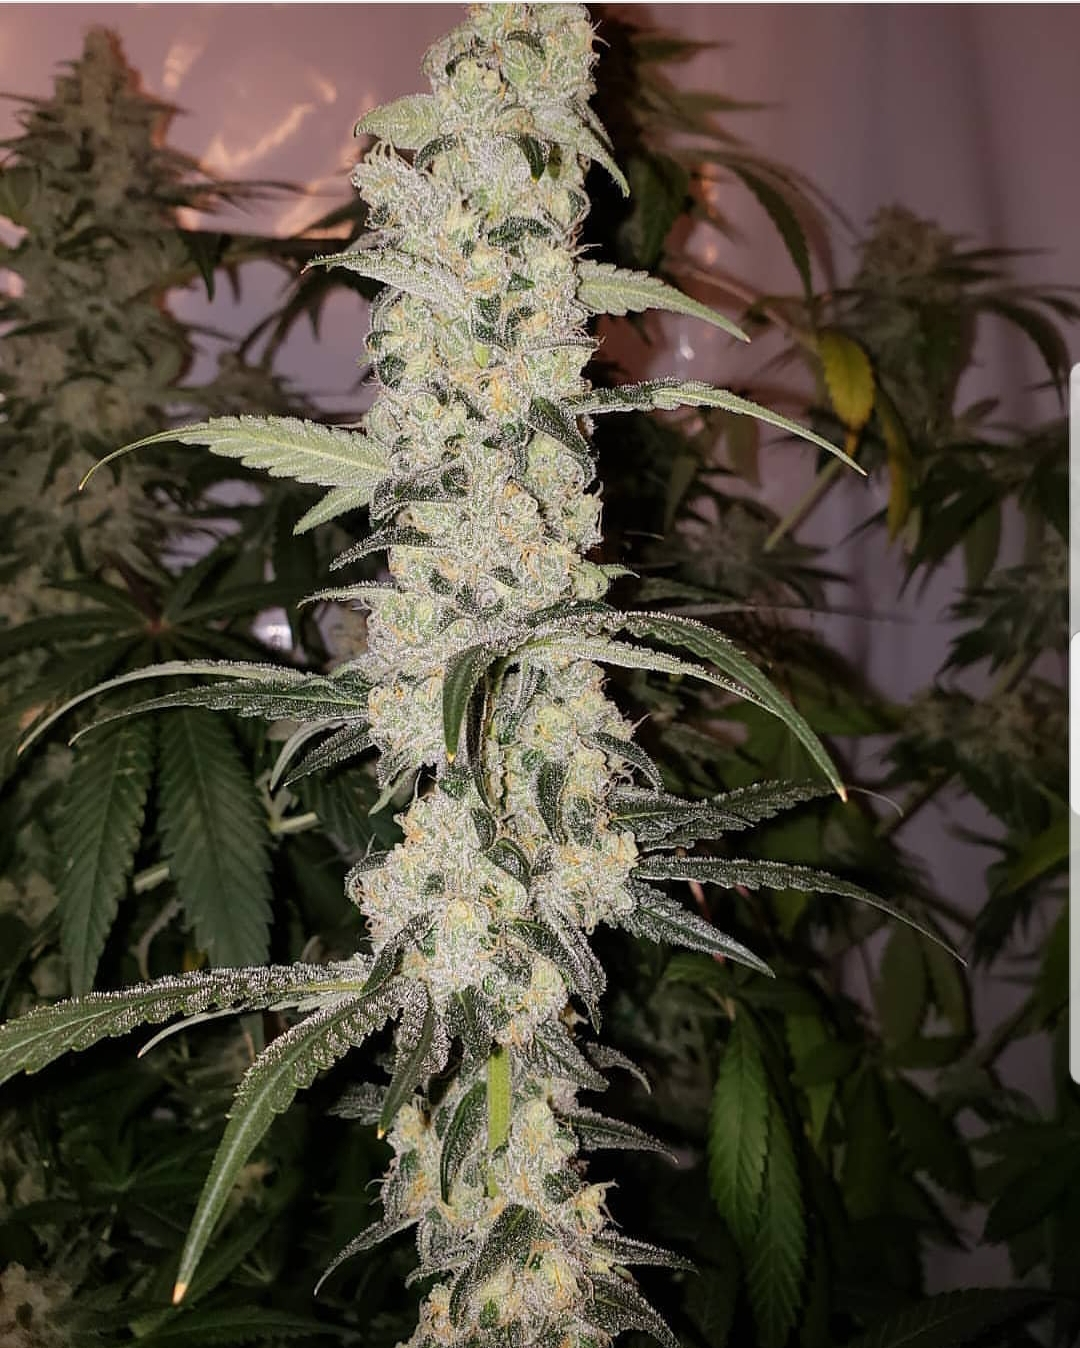 Peanut Butter Cookies - TasteBudz Seeds at the Lowest Prices Online! -  Popular Seeds